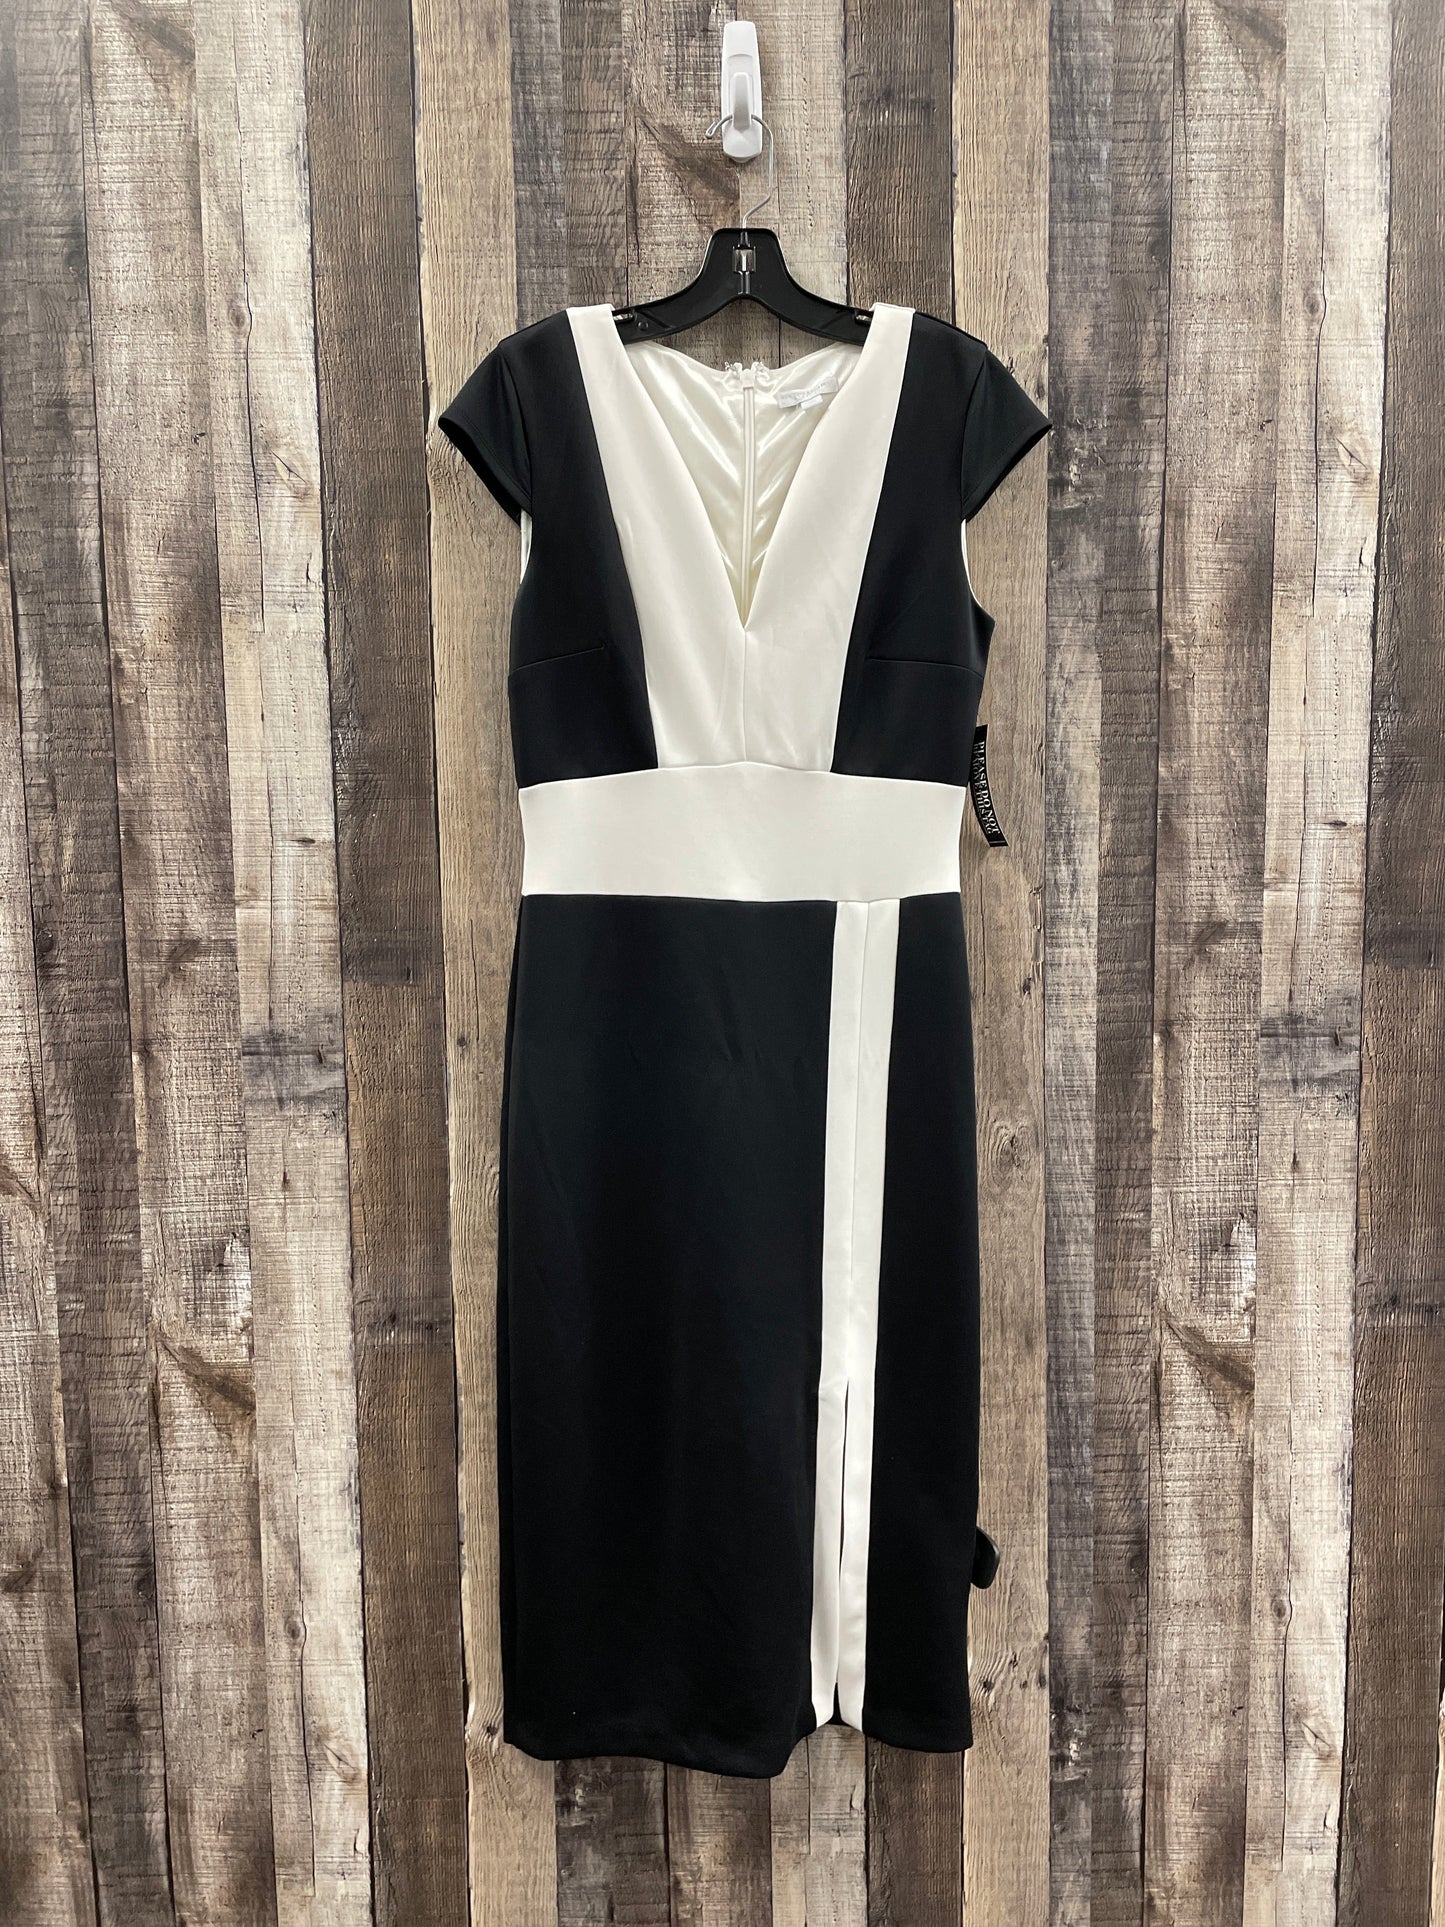 Black & White Dress Work New York And Co, Size S